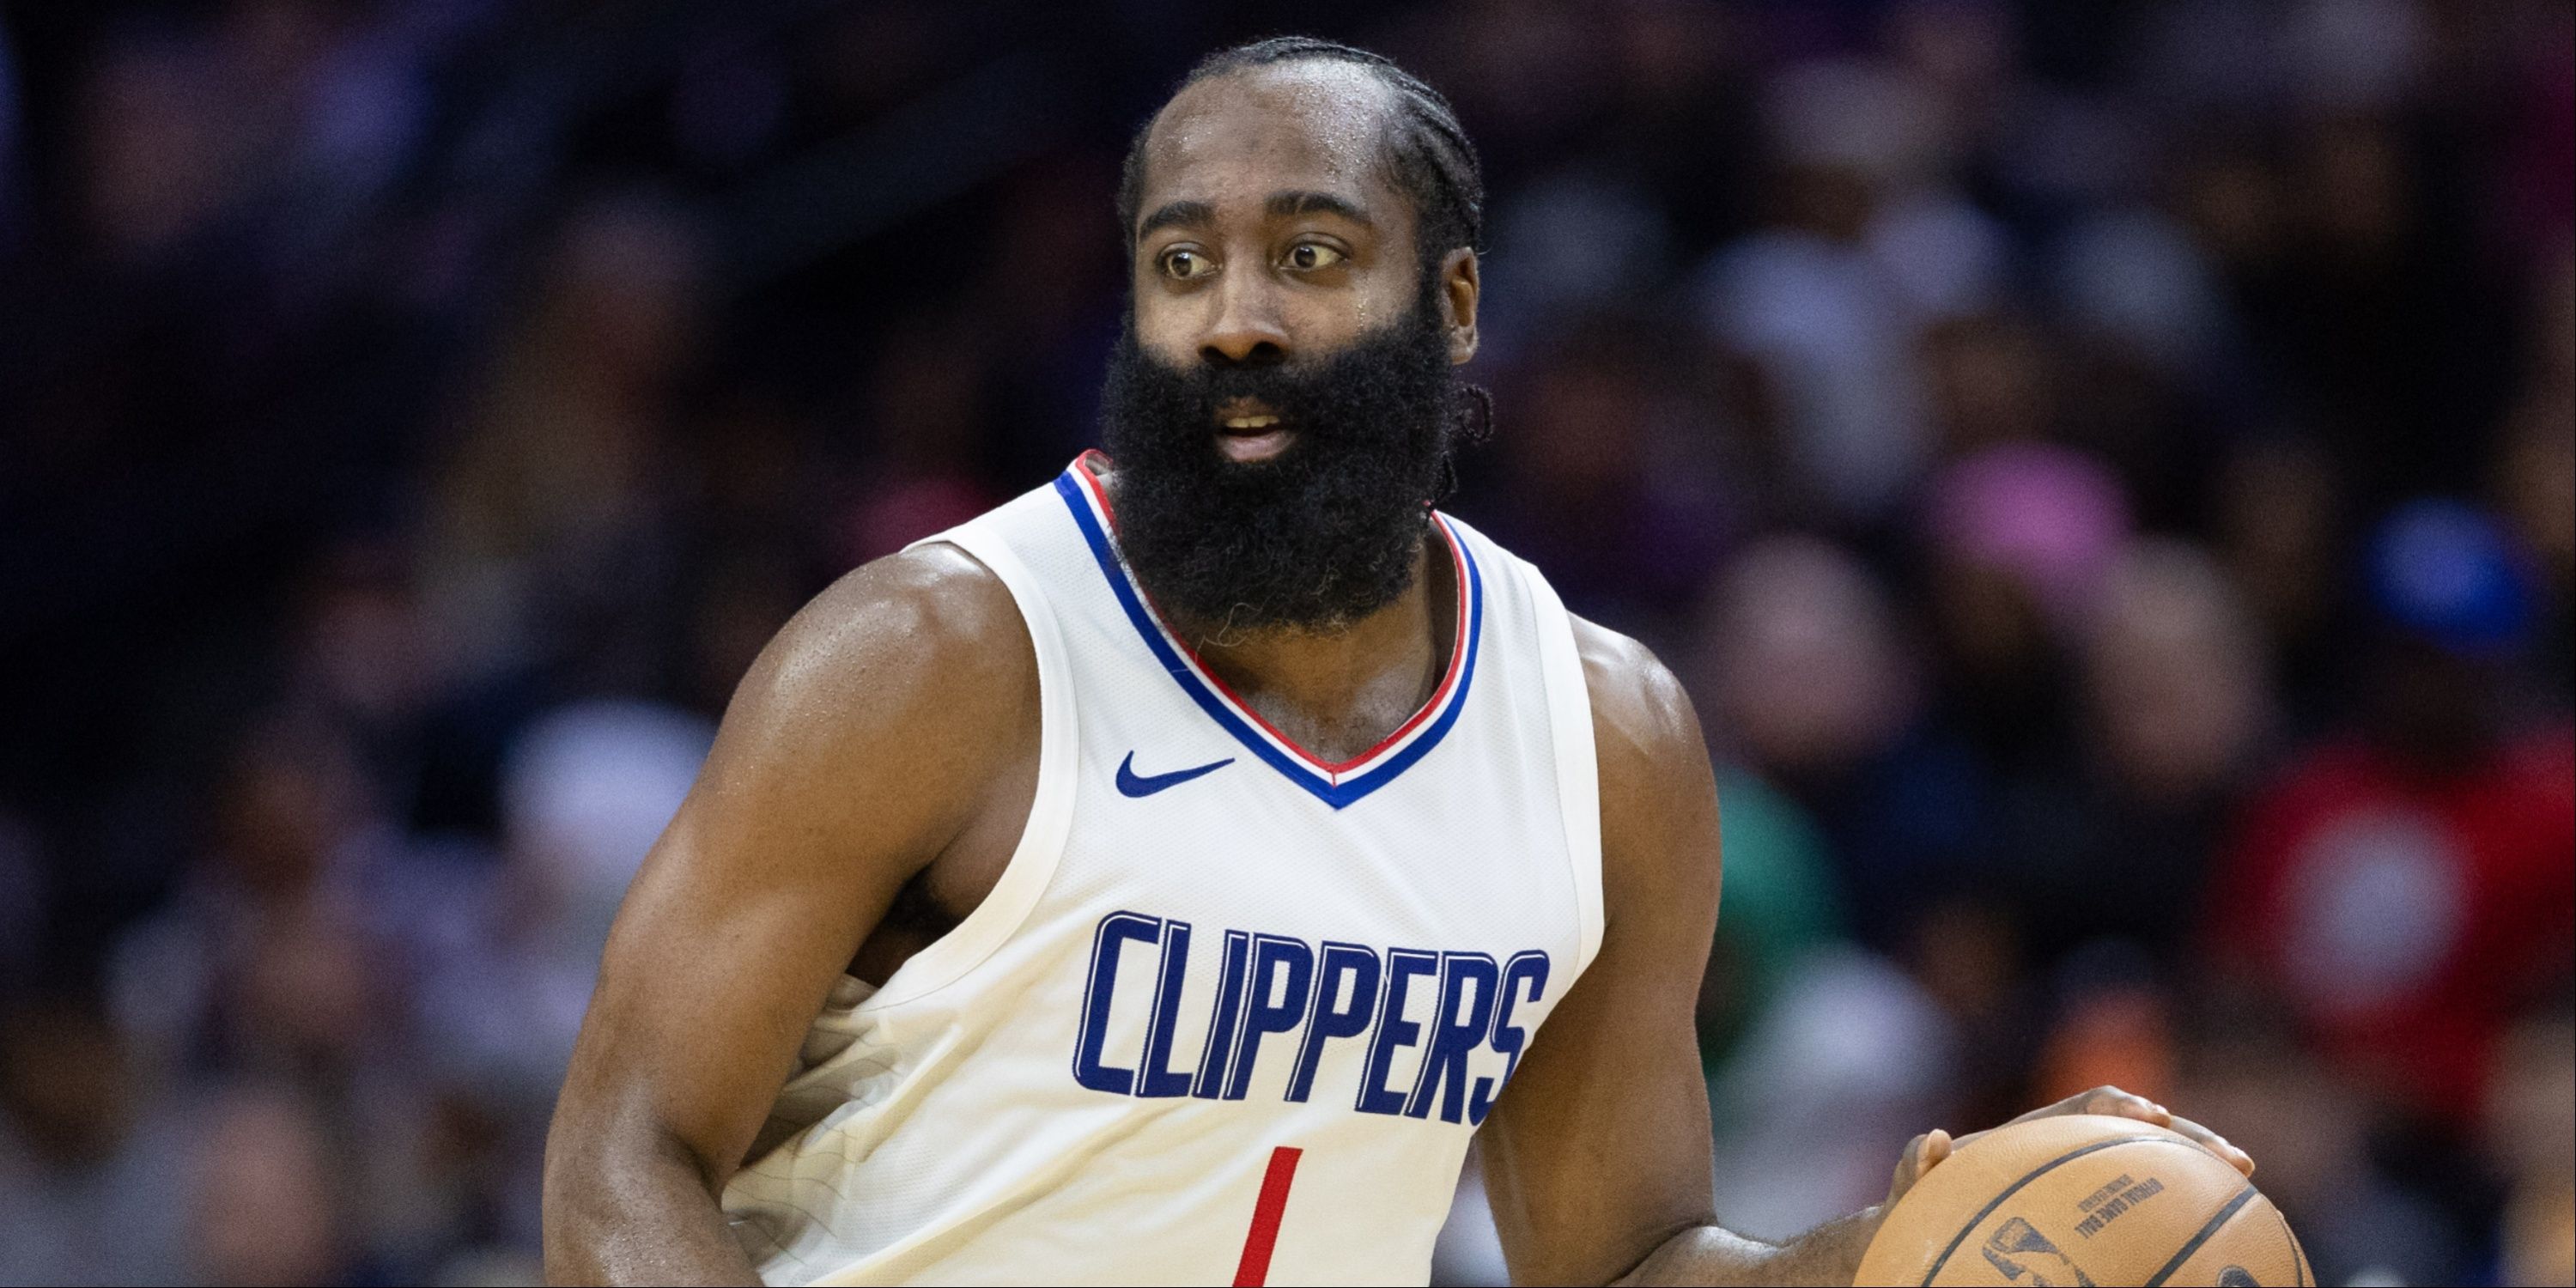 James Harden Had Little Interest in Discussing Joel Embiid, Daryl Morey After Clippers Win